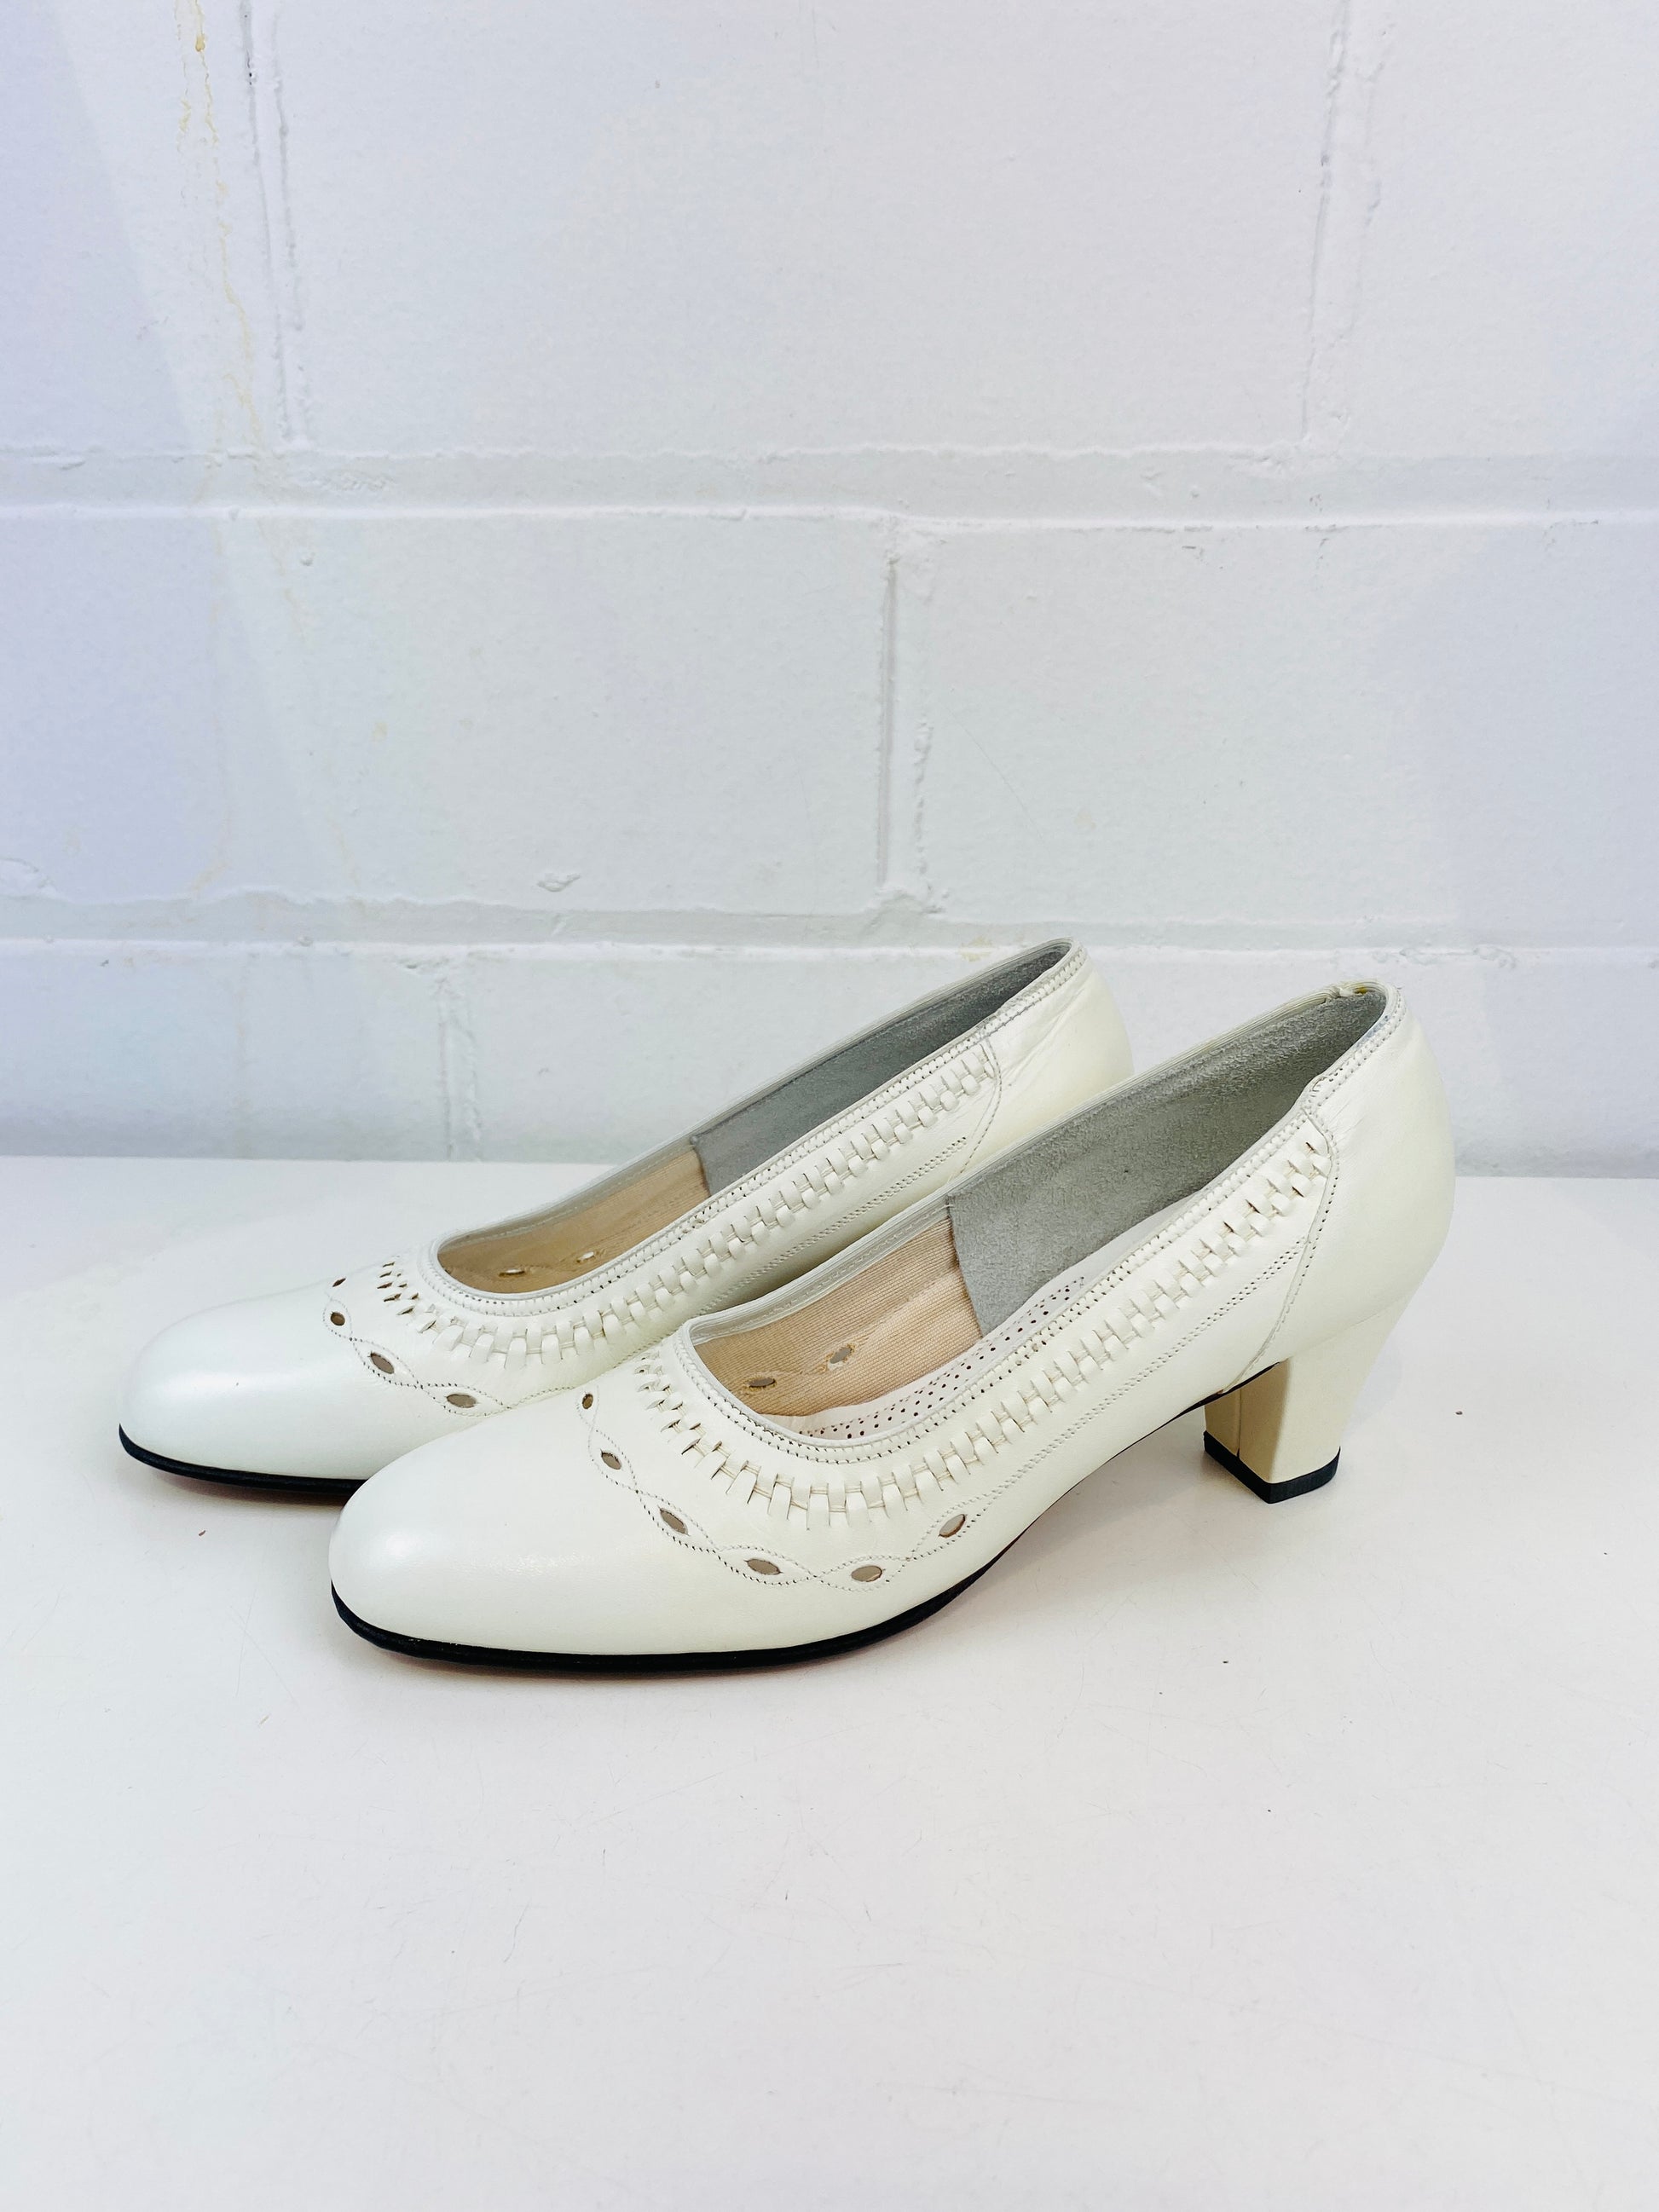 Vintage Deadstock Shoes, Women's 1980s White Leather Mid-Heel Pumps, NOS, 8230